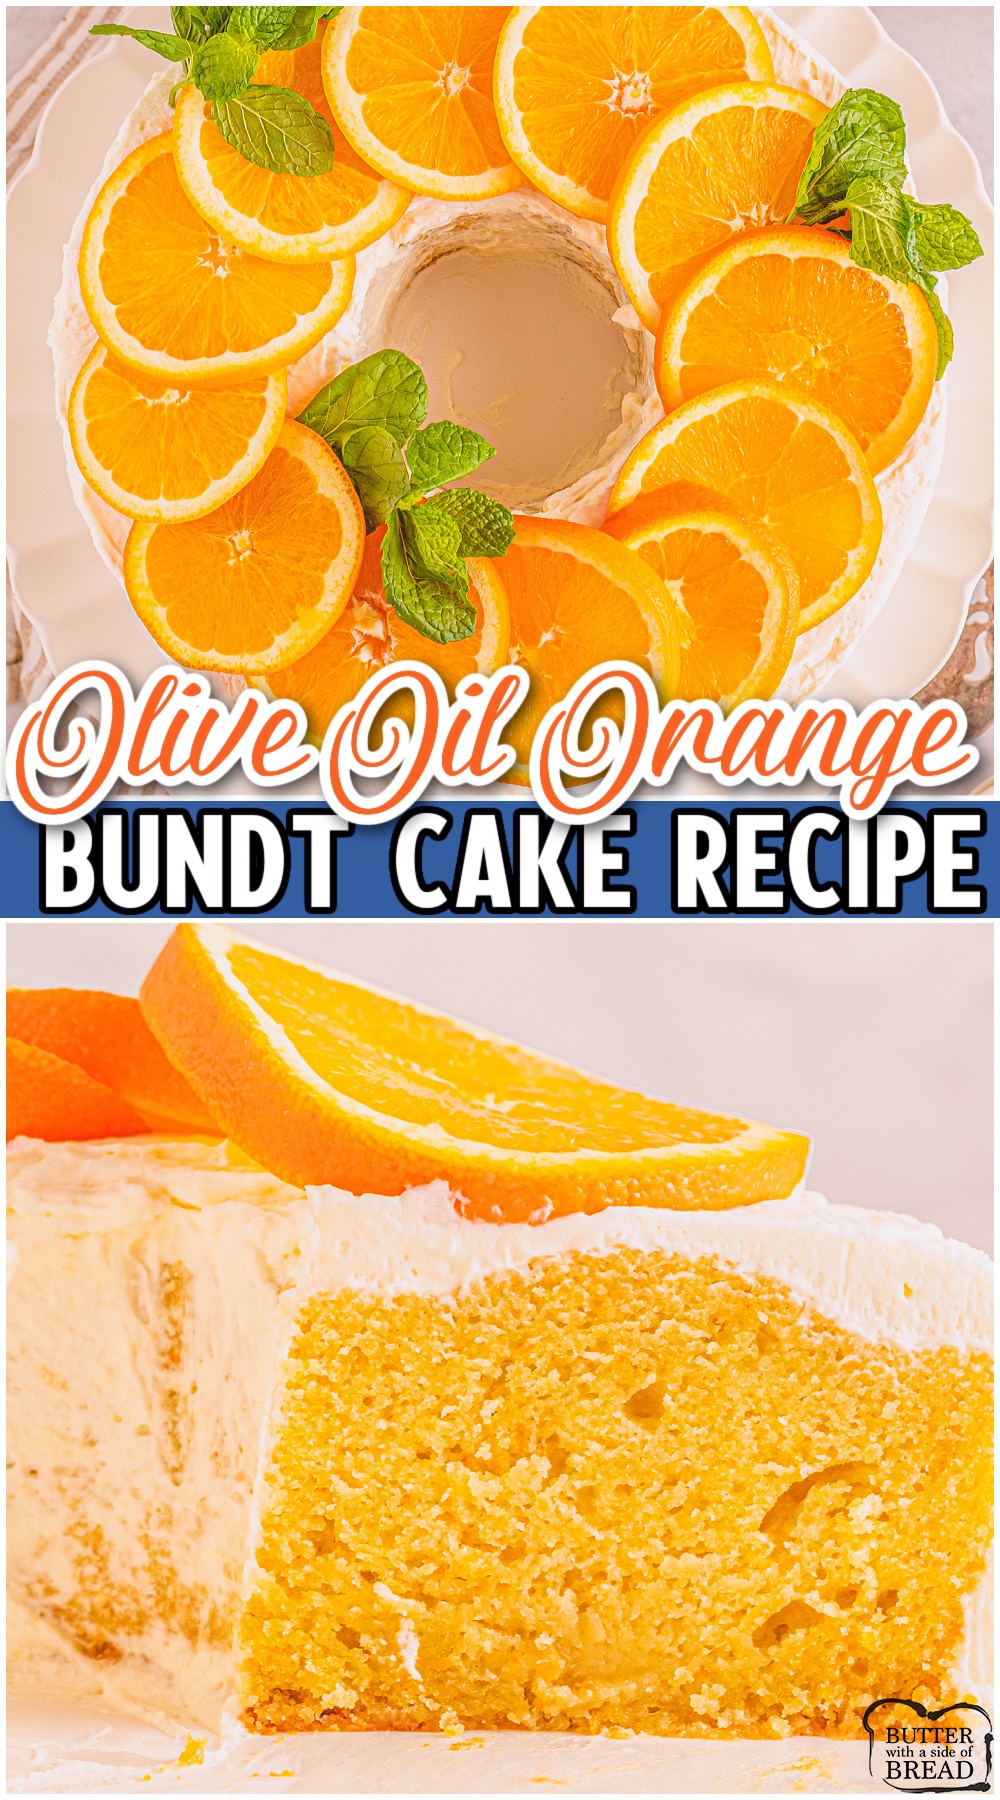 Olive Oil Orange Bundt Cake is a moist & flavorful cake with bright orange citrus flavor! Homemade orange bundt cake made with olive oil & topped with a lovely cream cheese frosting.